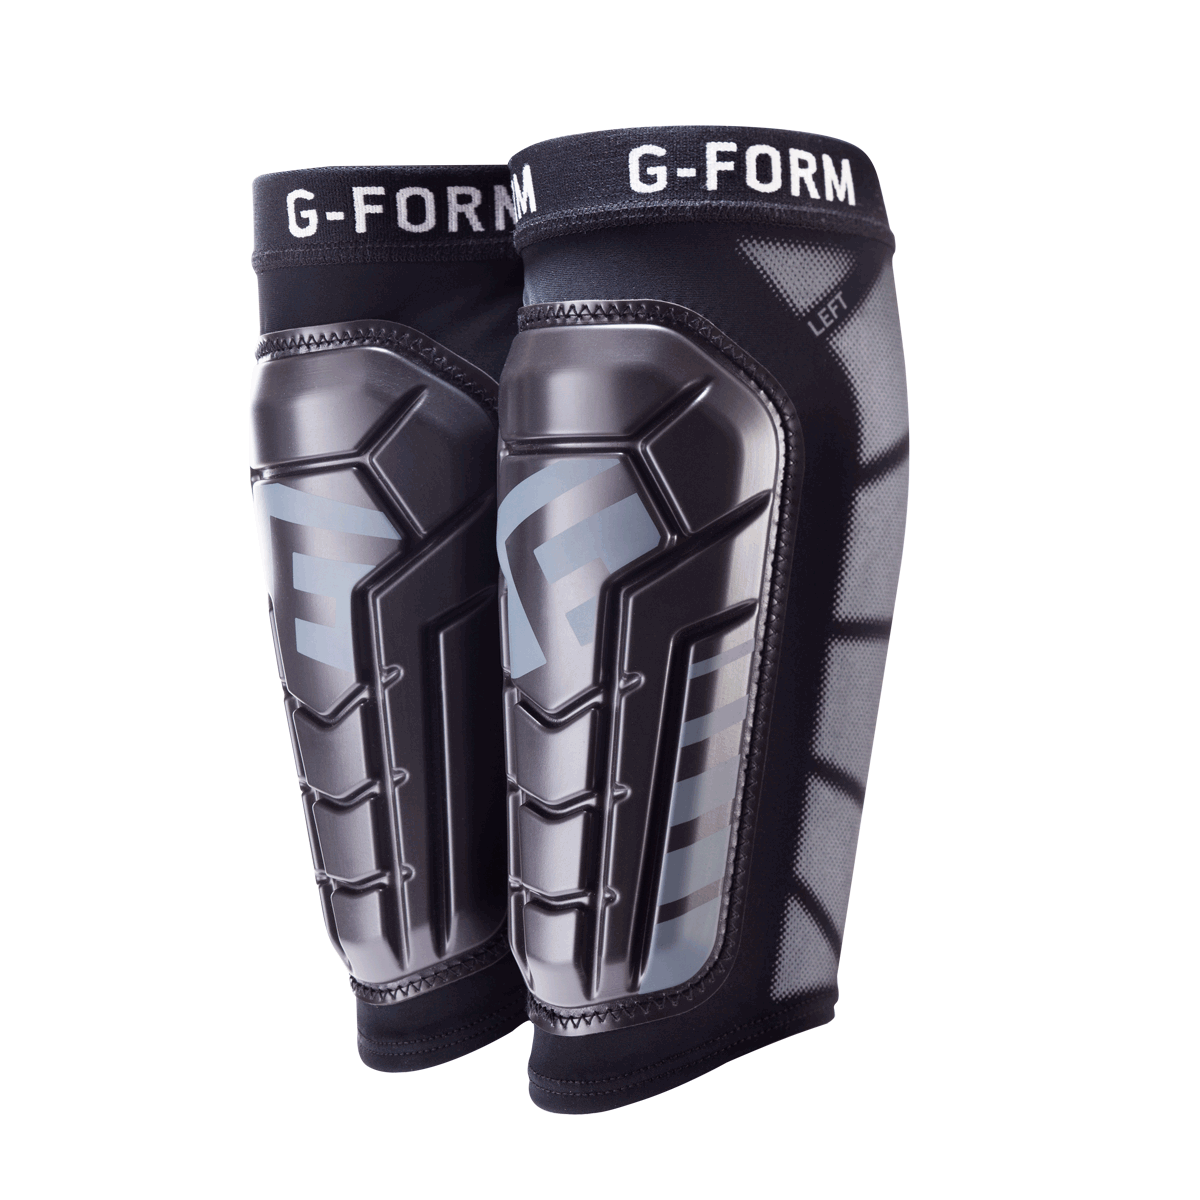 G-Form. Buy the latest releases from G-Form in football - Fútbol